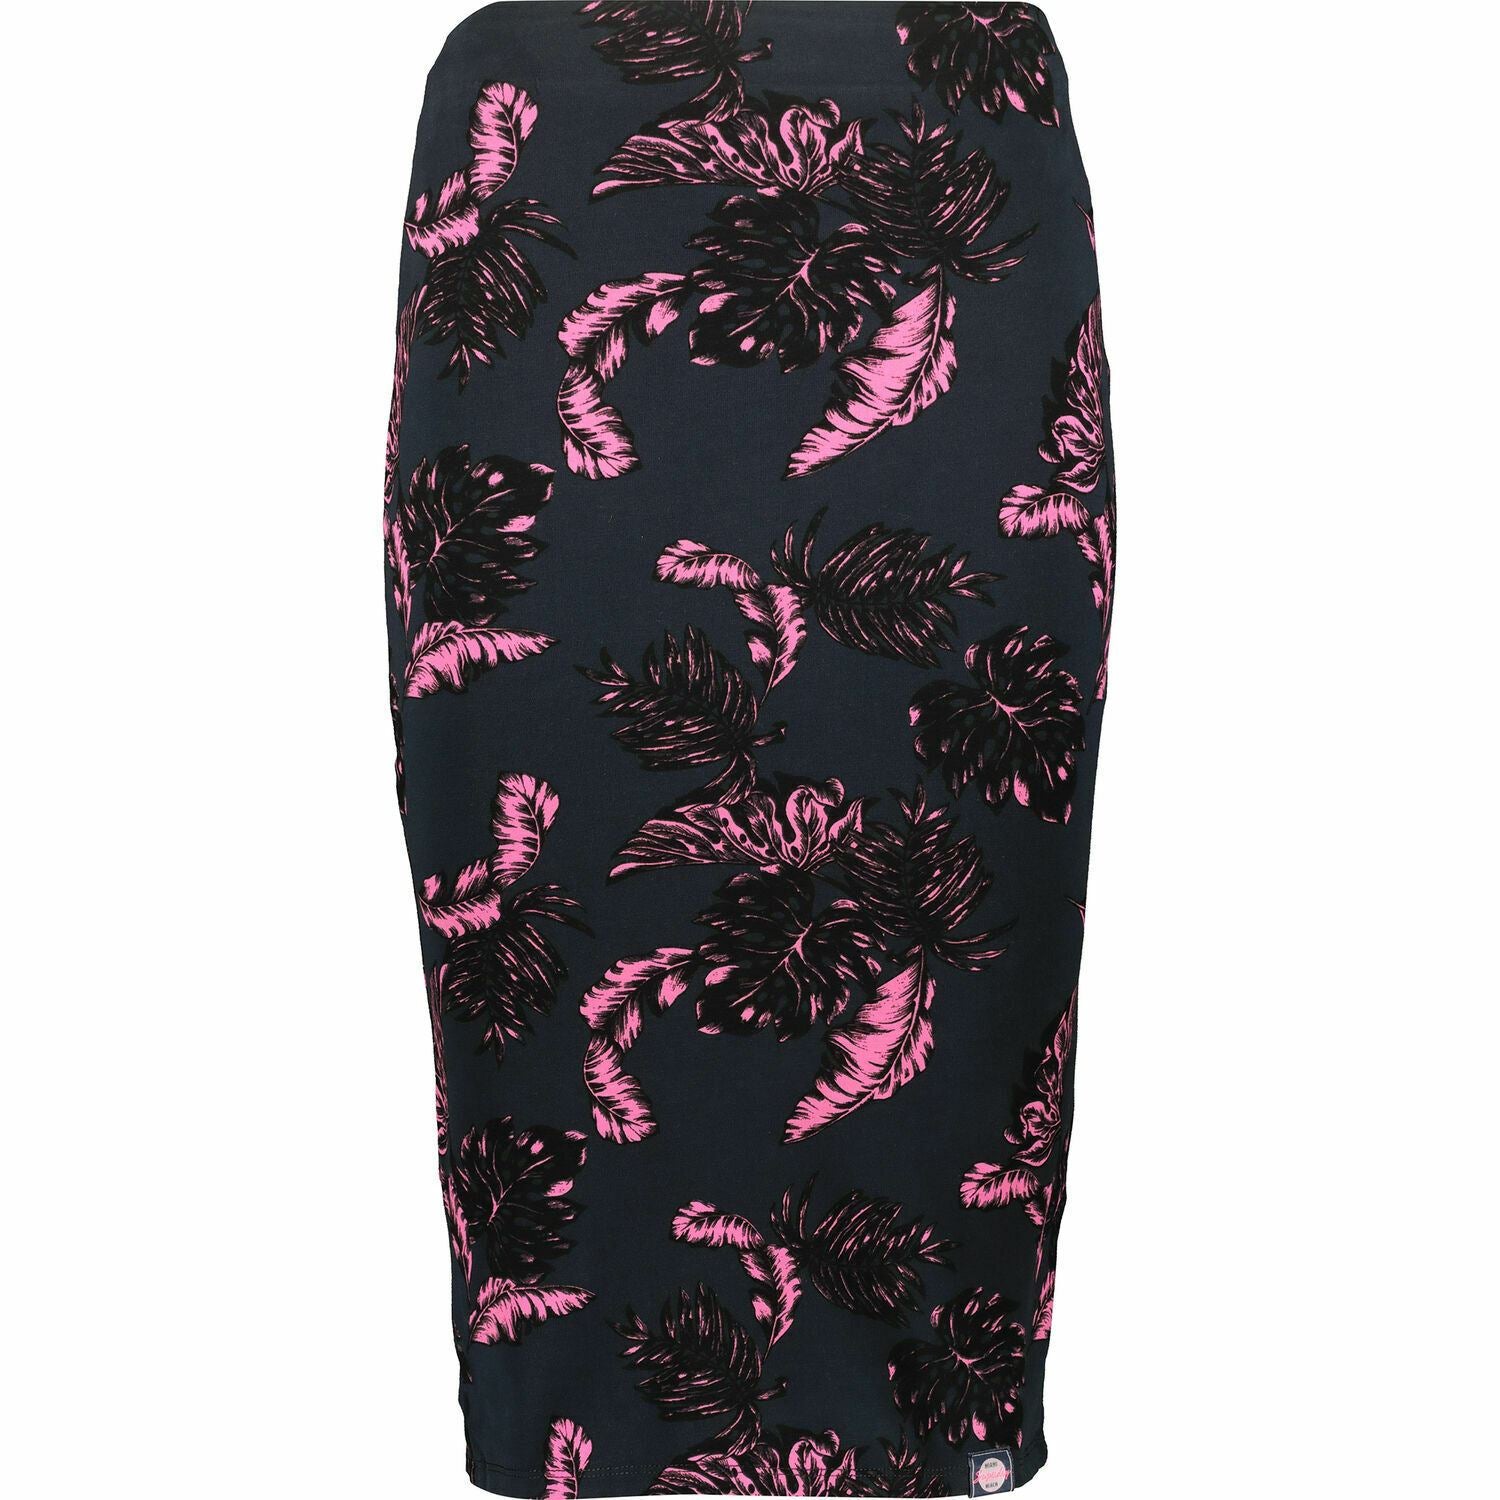 SUPERDRY Women's Beach Leaf Pencil Skirt, Tropical Navy / Pink, size S - UK 10